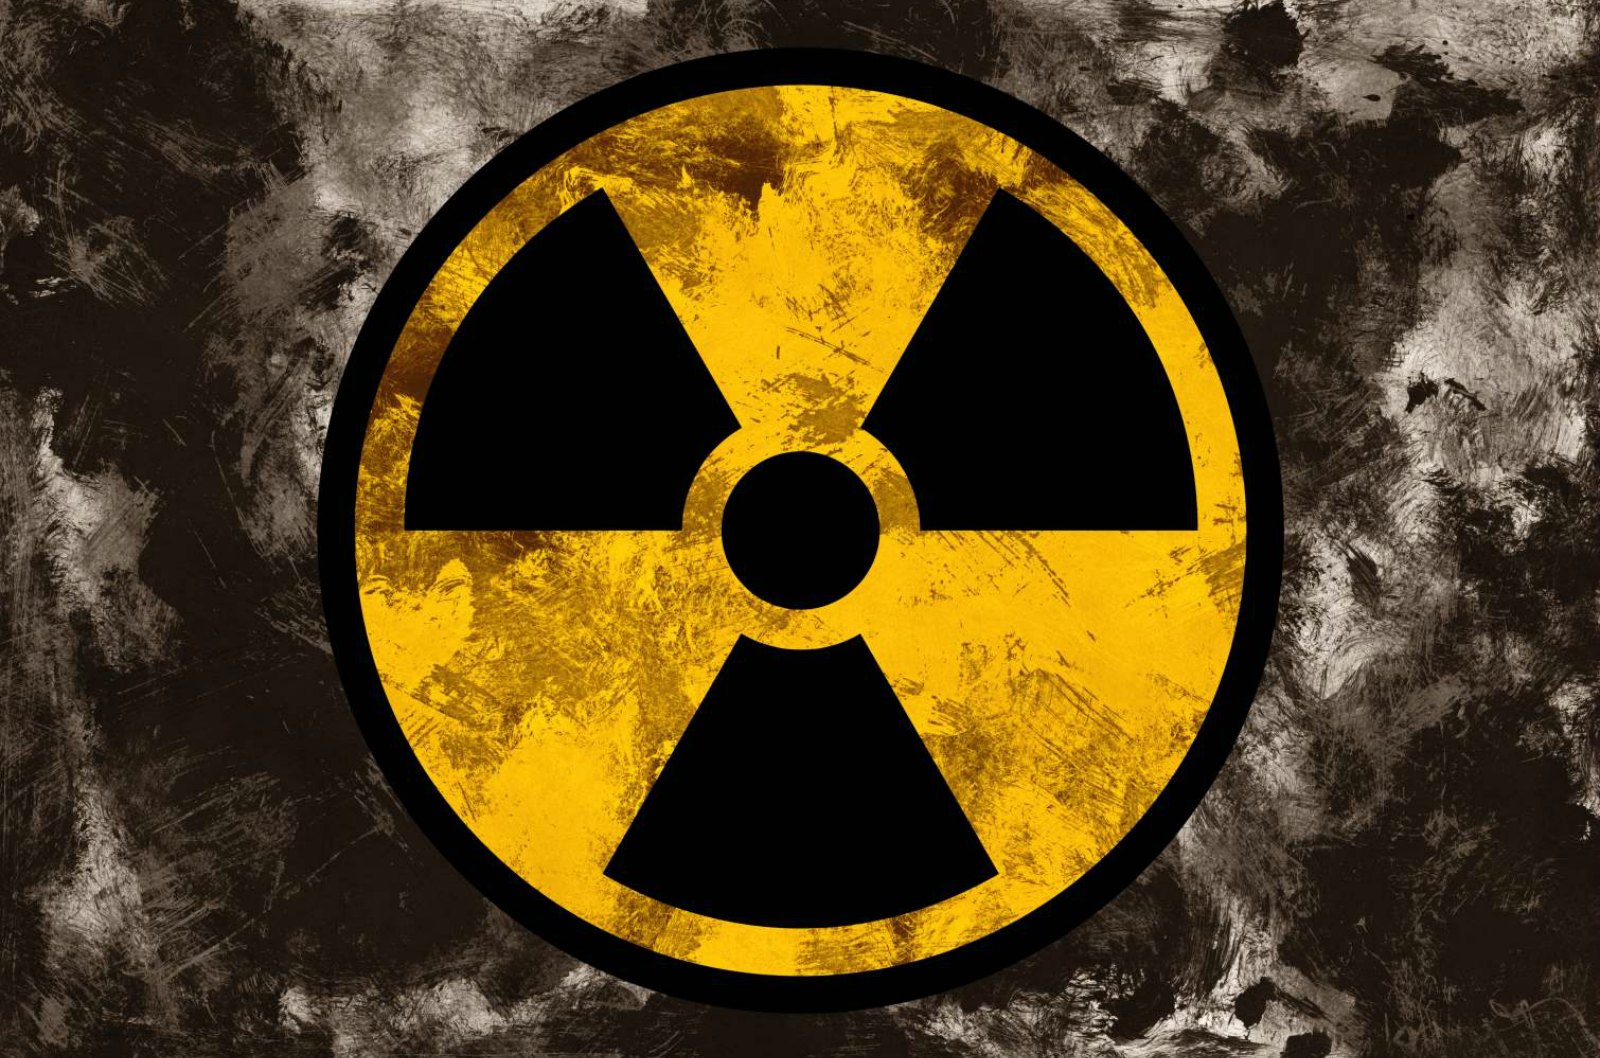 Breakthrough Technology Minimizes the Effects of Radiation Exposure